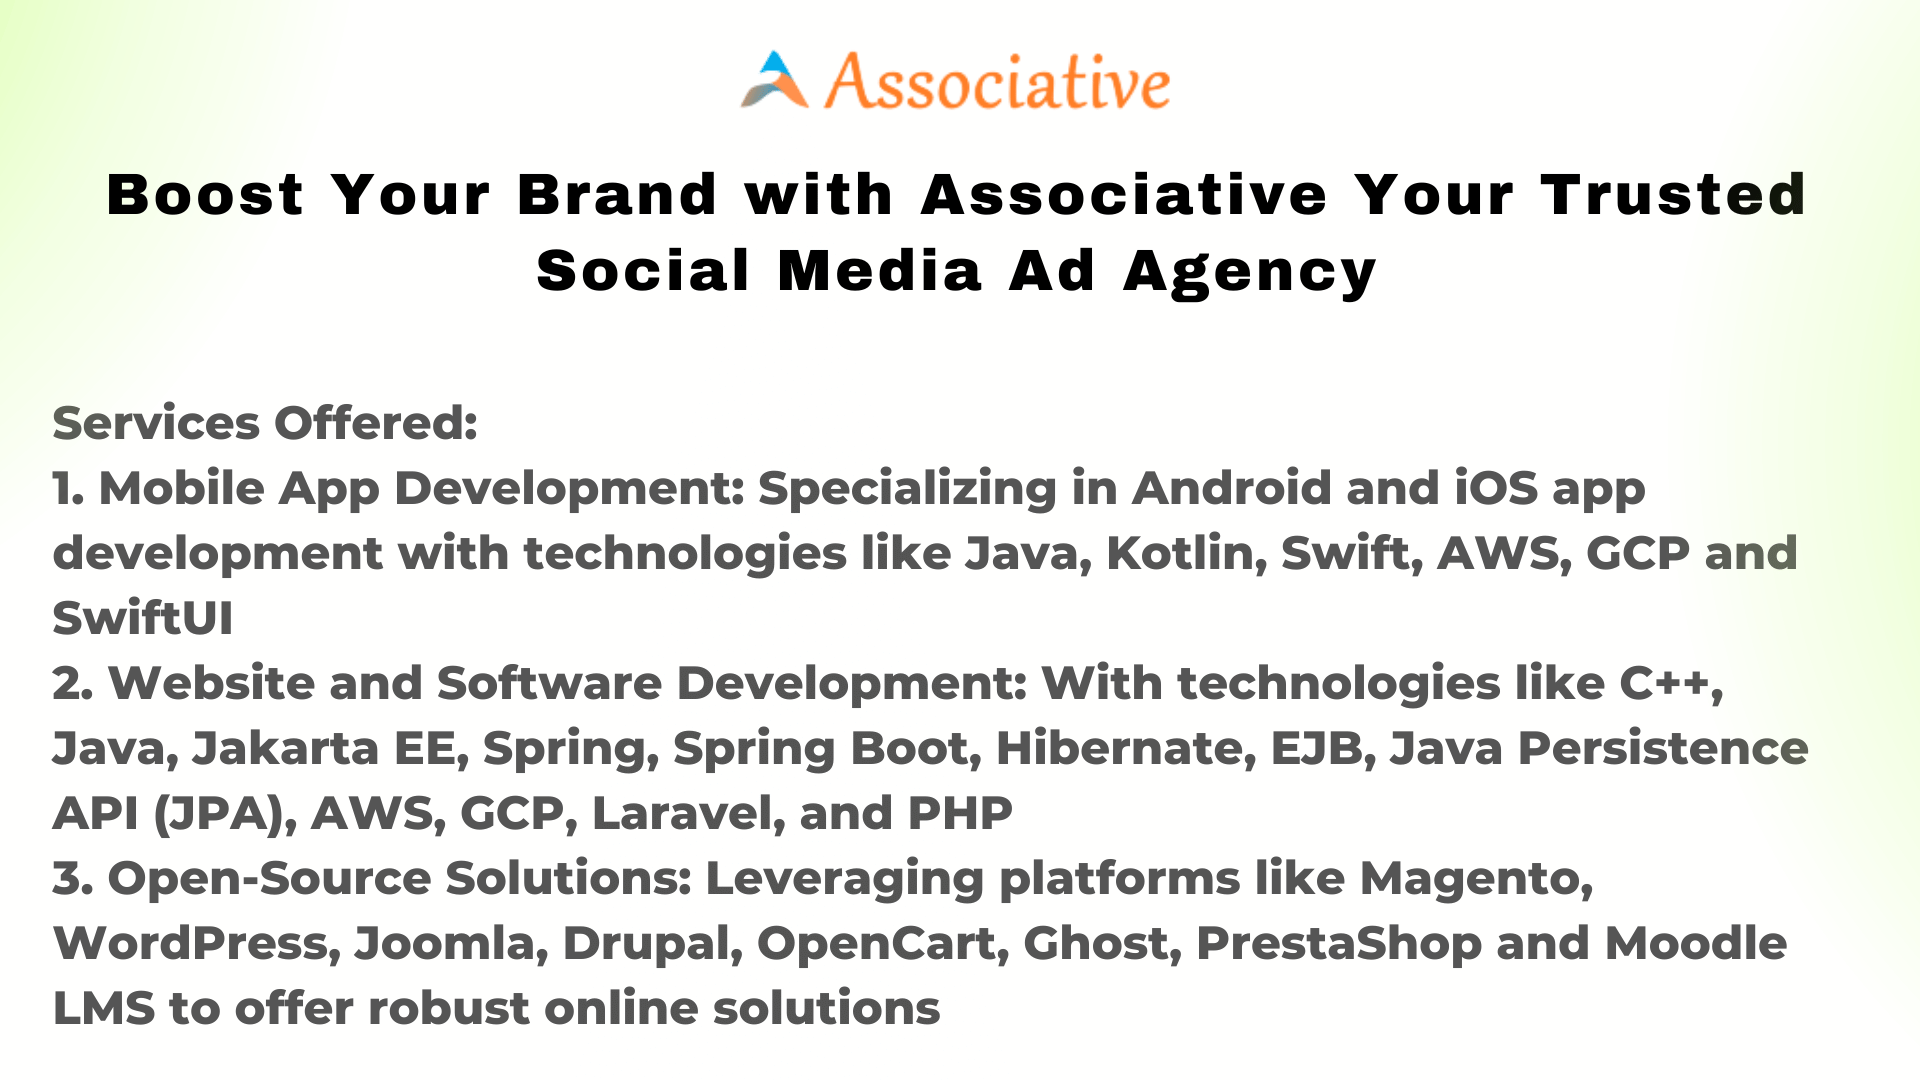 Boost Your Brand with Associative Your Trusted Social Media Ad Agency